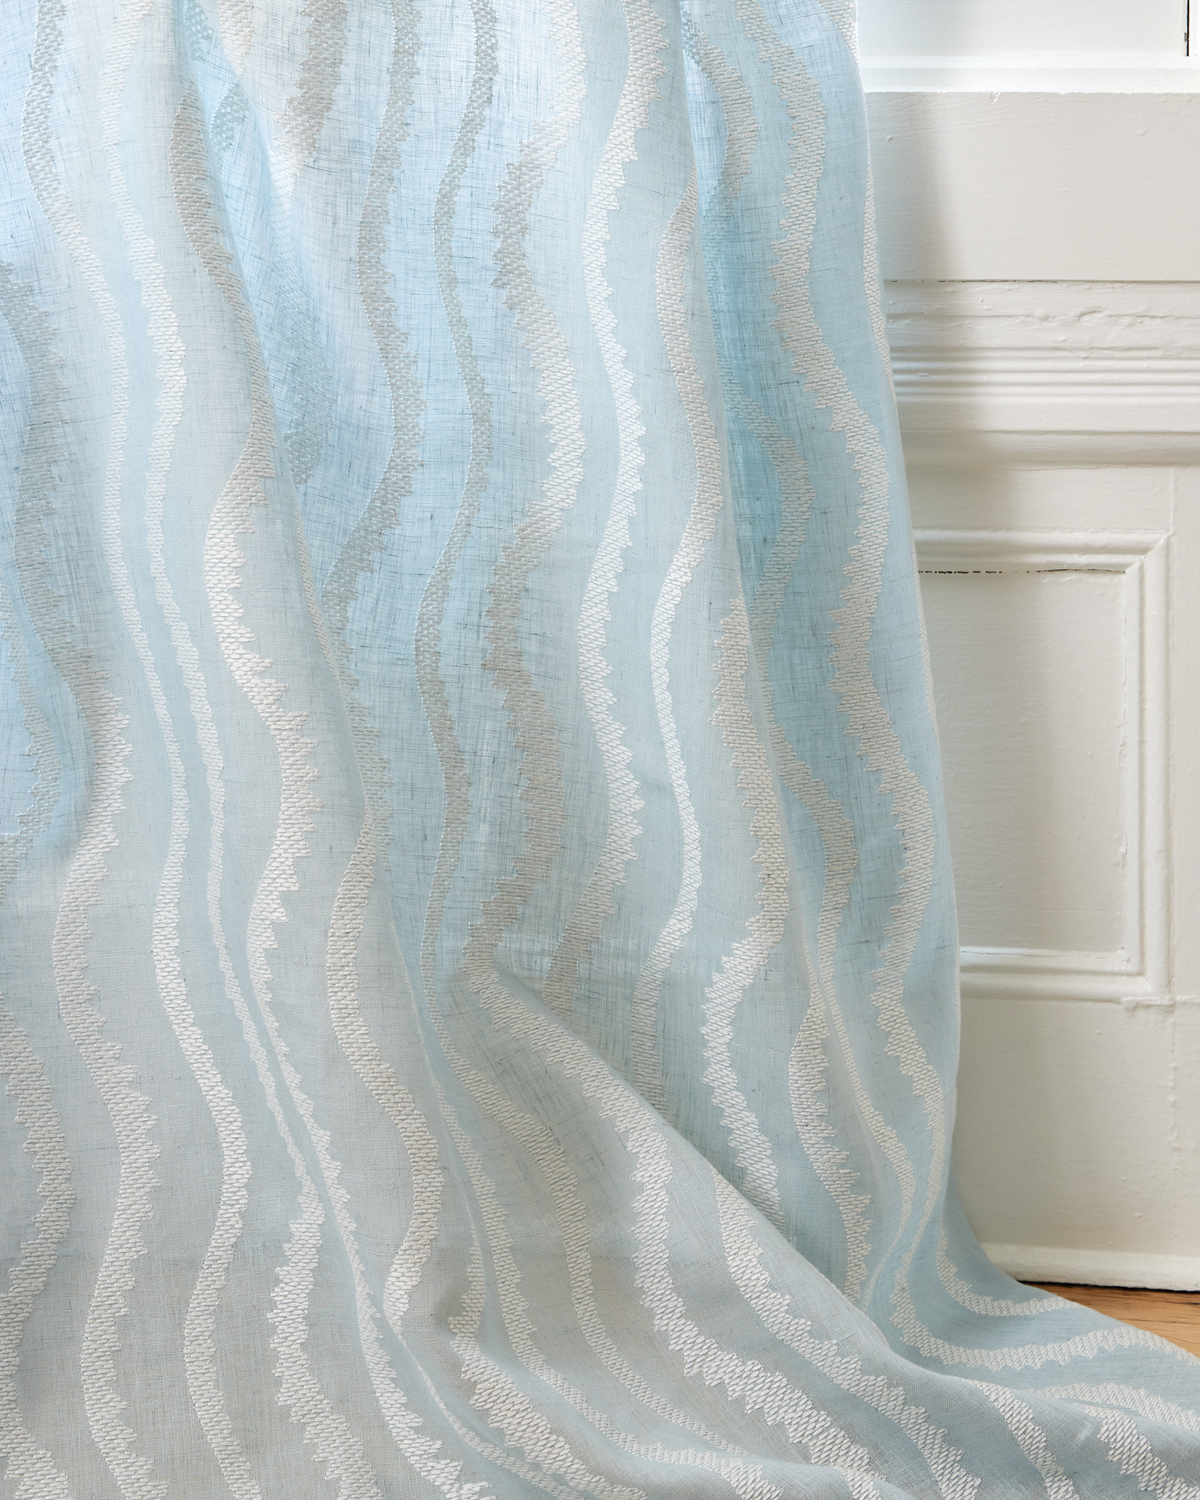 Notched Vines Sheer Fabric in Light Blue